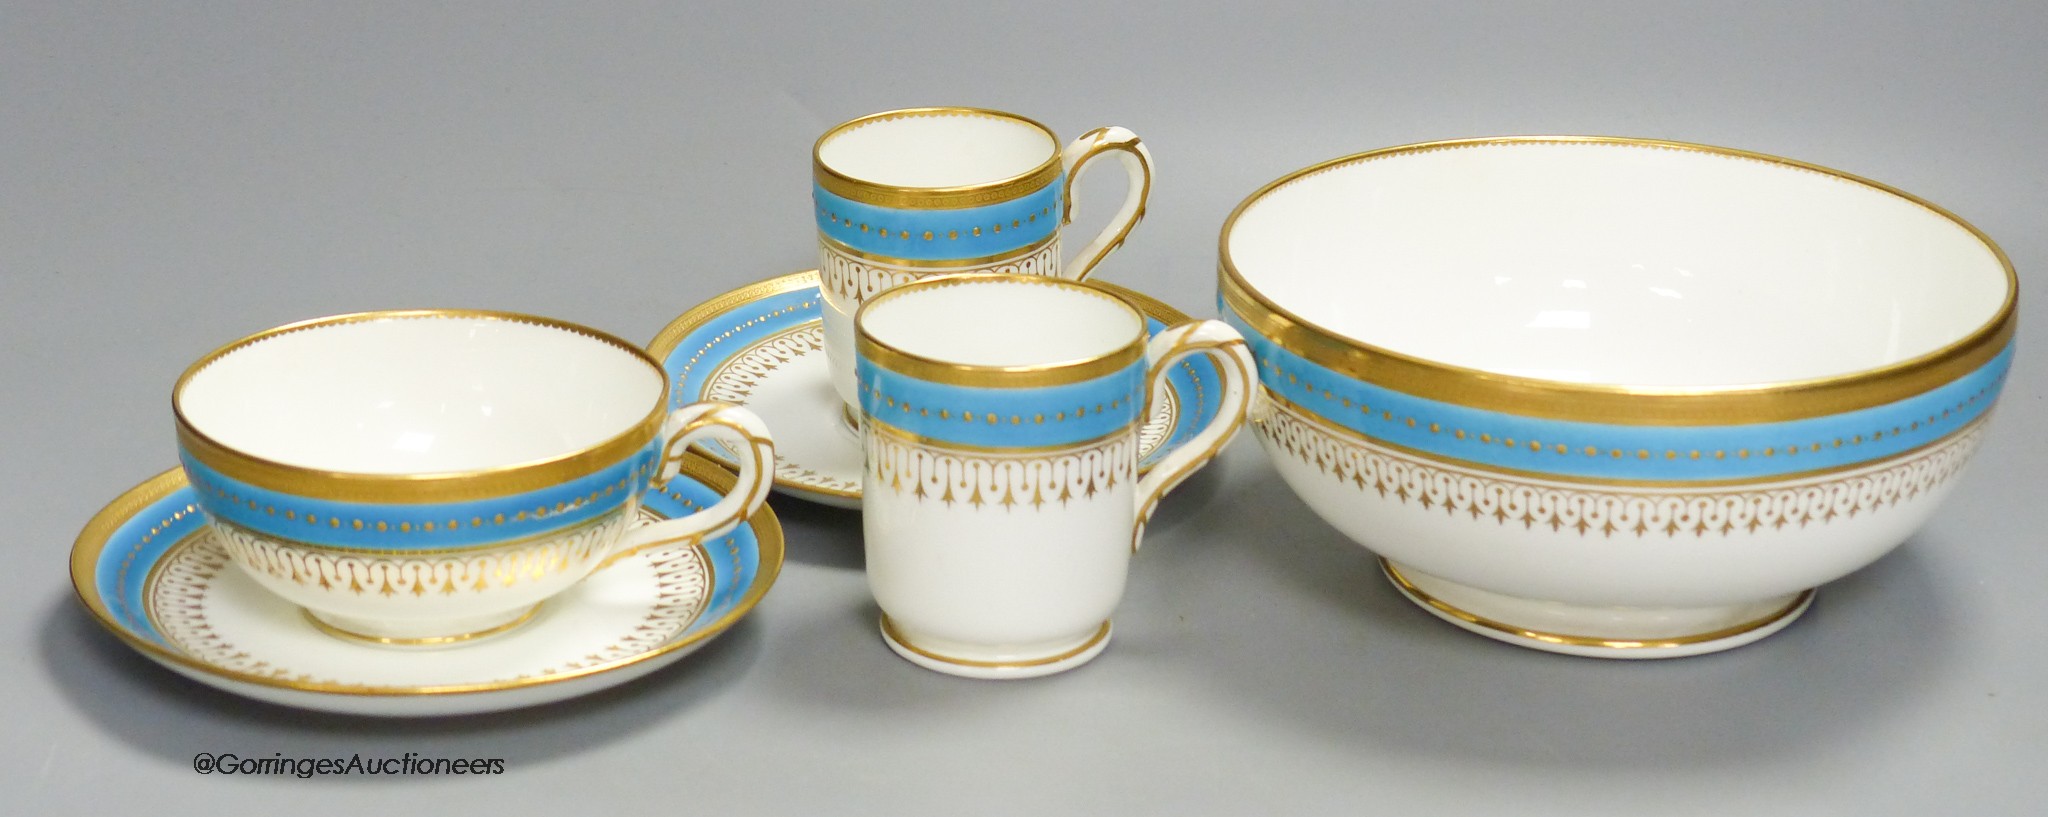 A Minton coffee cup, teacup and saucer with turquoise and gold jewelled band under a gold acid